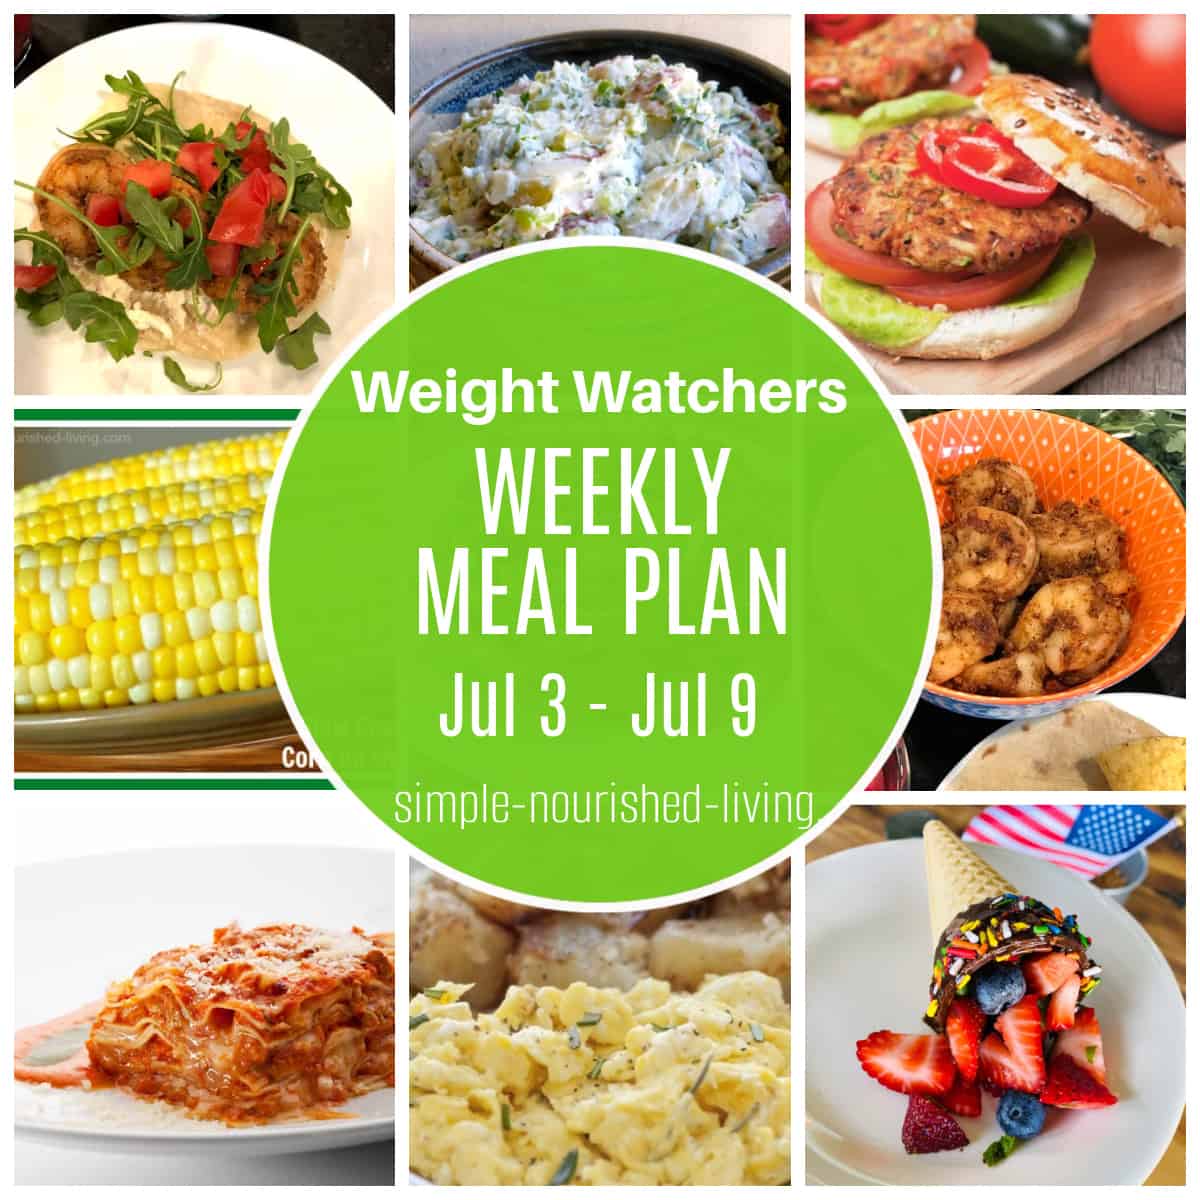 9 Frame Food Photo Collage featuring: shrimp tacos, potato salad, veggie burgers, corn on the cob, bowl of sauteed shrimp, chicken parmesan lasagna, scrambled eggs, and chocolate dip fruit filled ice cream cones with Green Round Overlay: Weight Watchers Weekly Meal Plan Jul 3 - Jul 9 